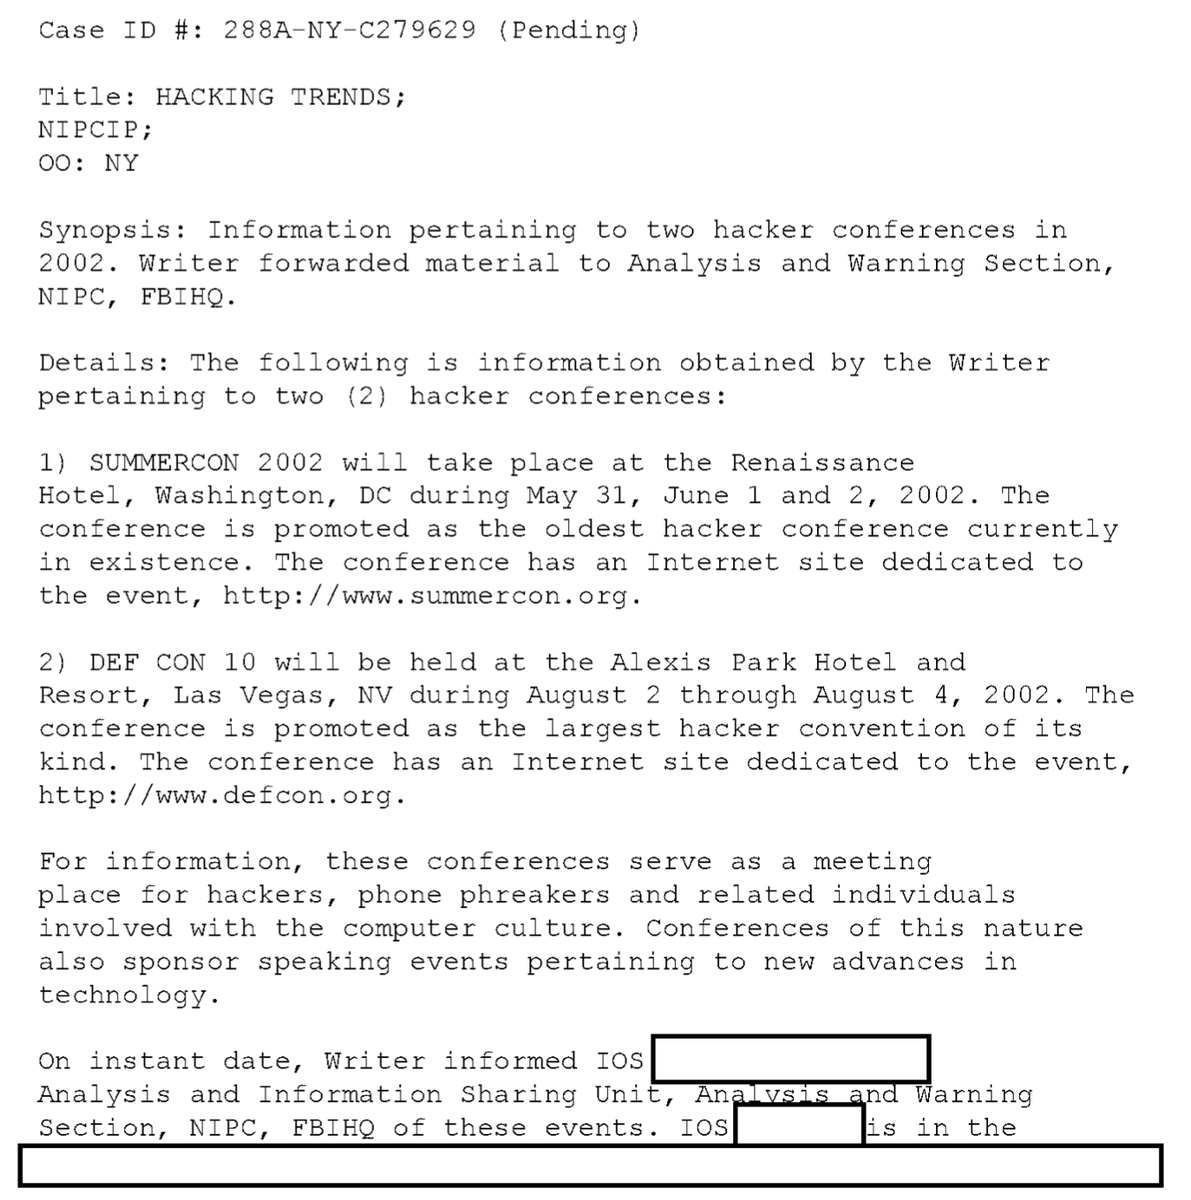 Still in 2002, FBI tracks Summercon and DEFCON as more or less the same thing as far as the investigative interest is concerned.